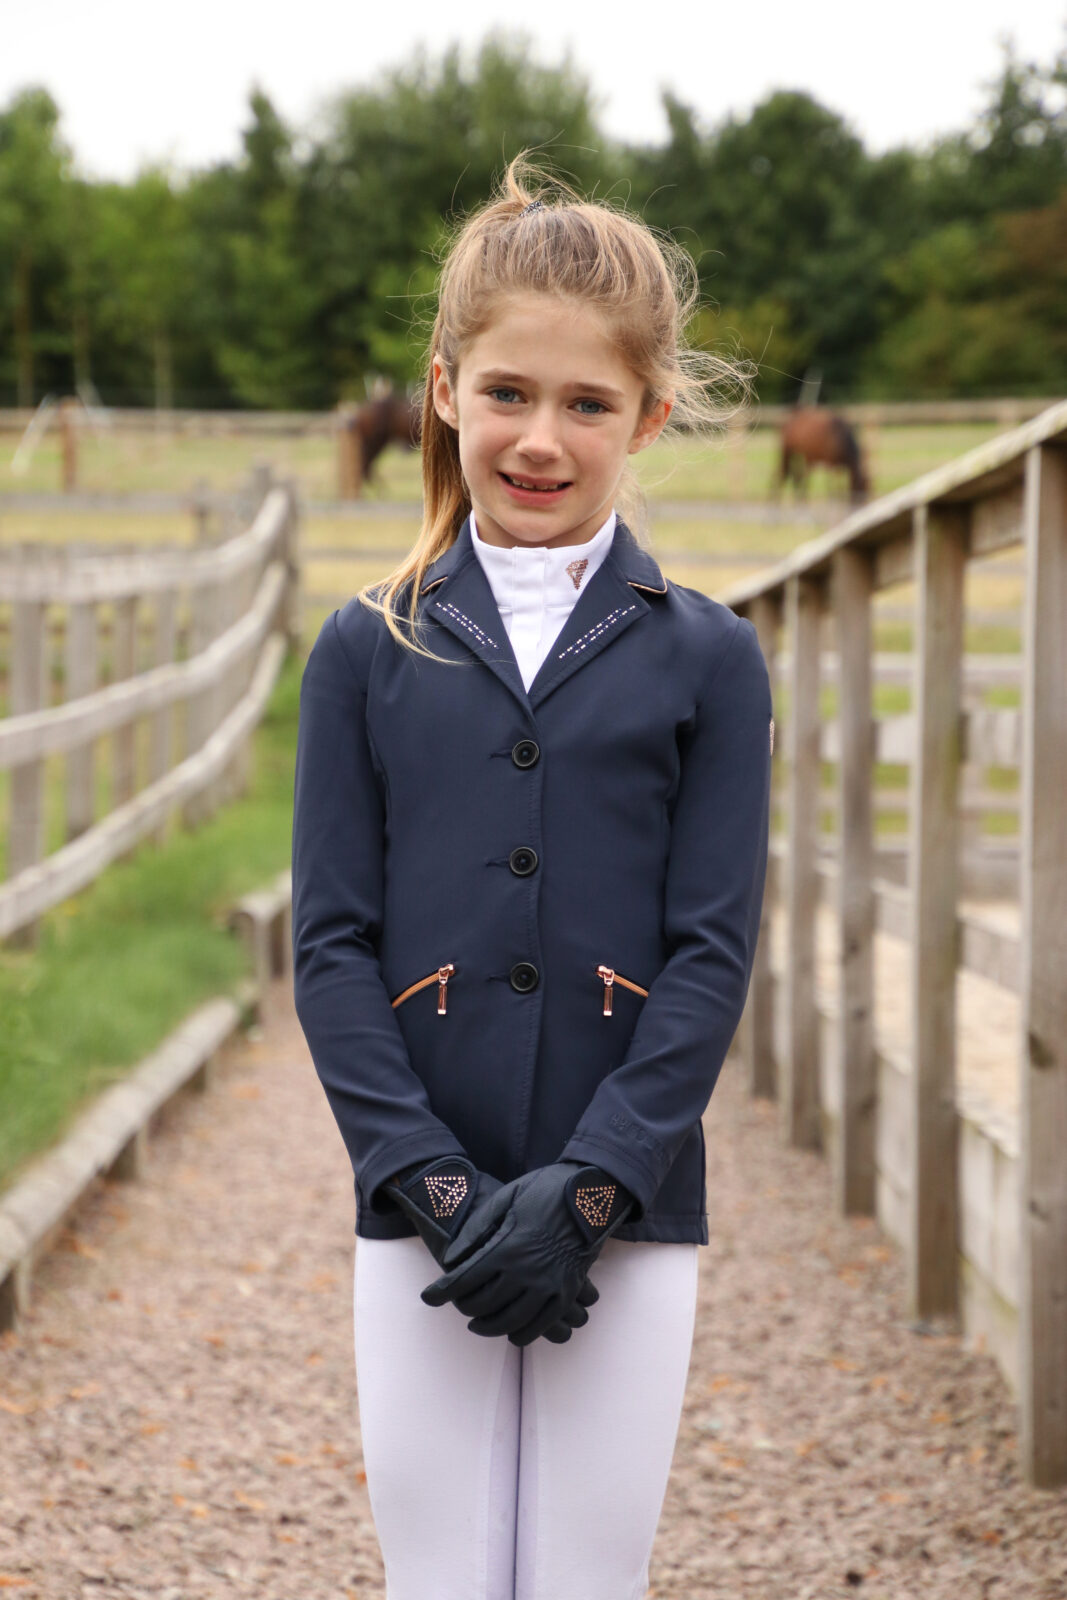 Lancelot Lookbook  Equestrian outfits, Riding outfit, New blouse